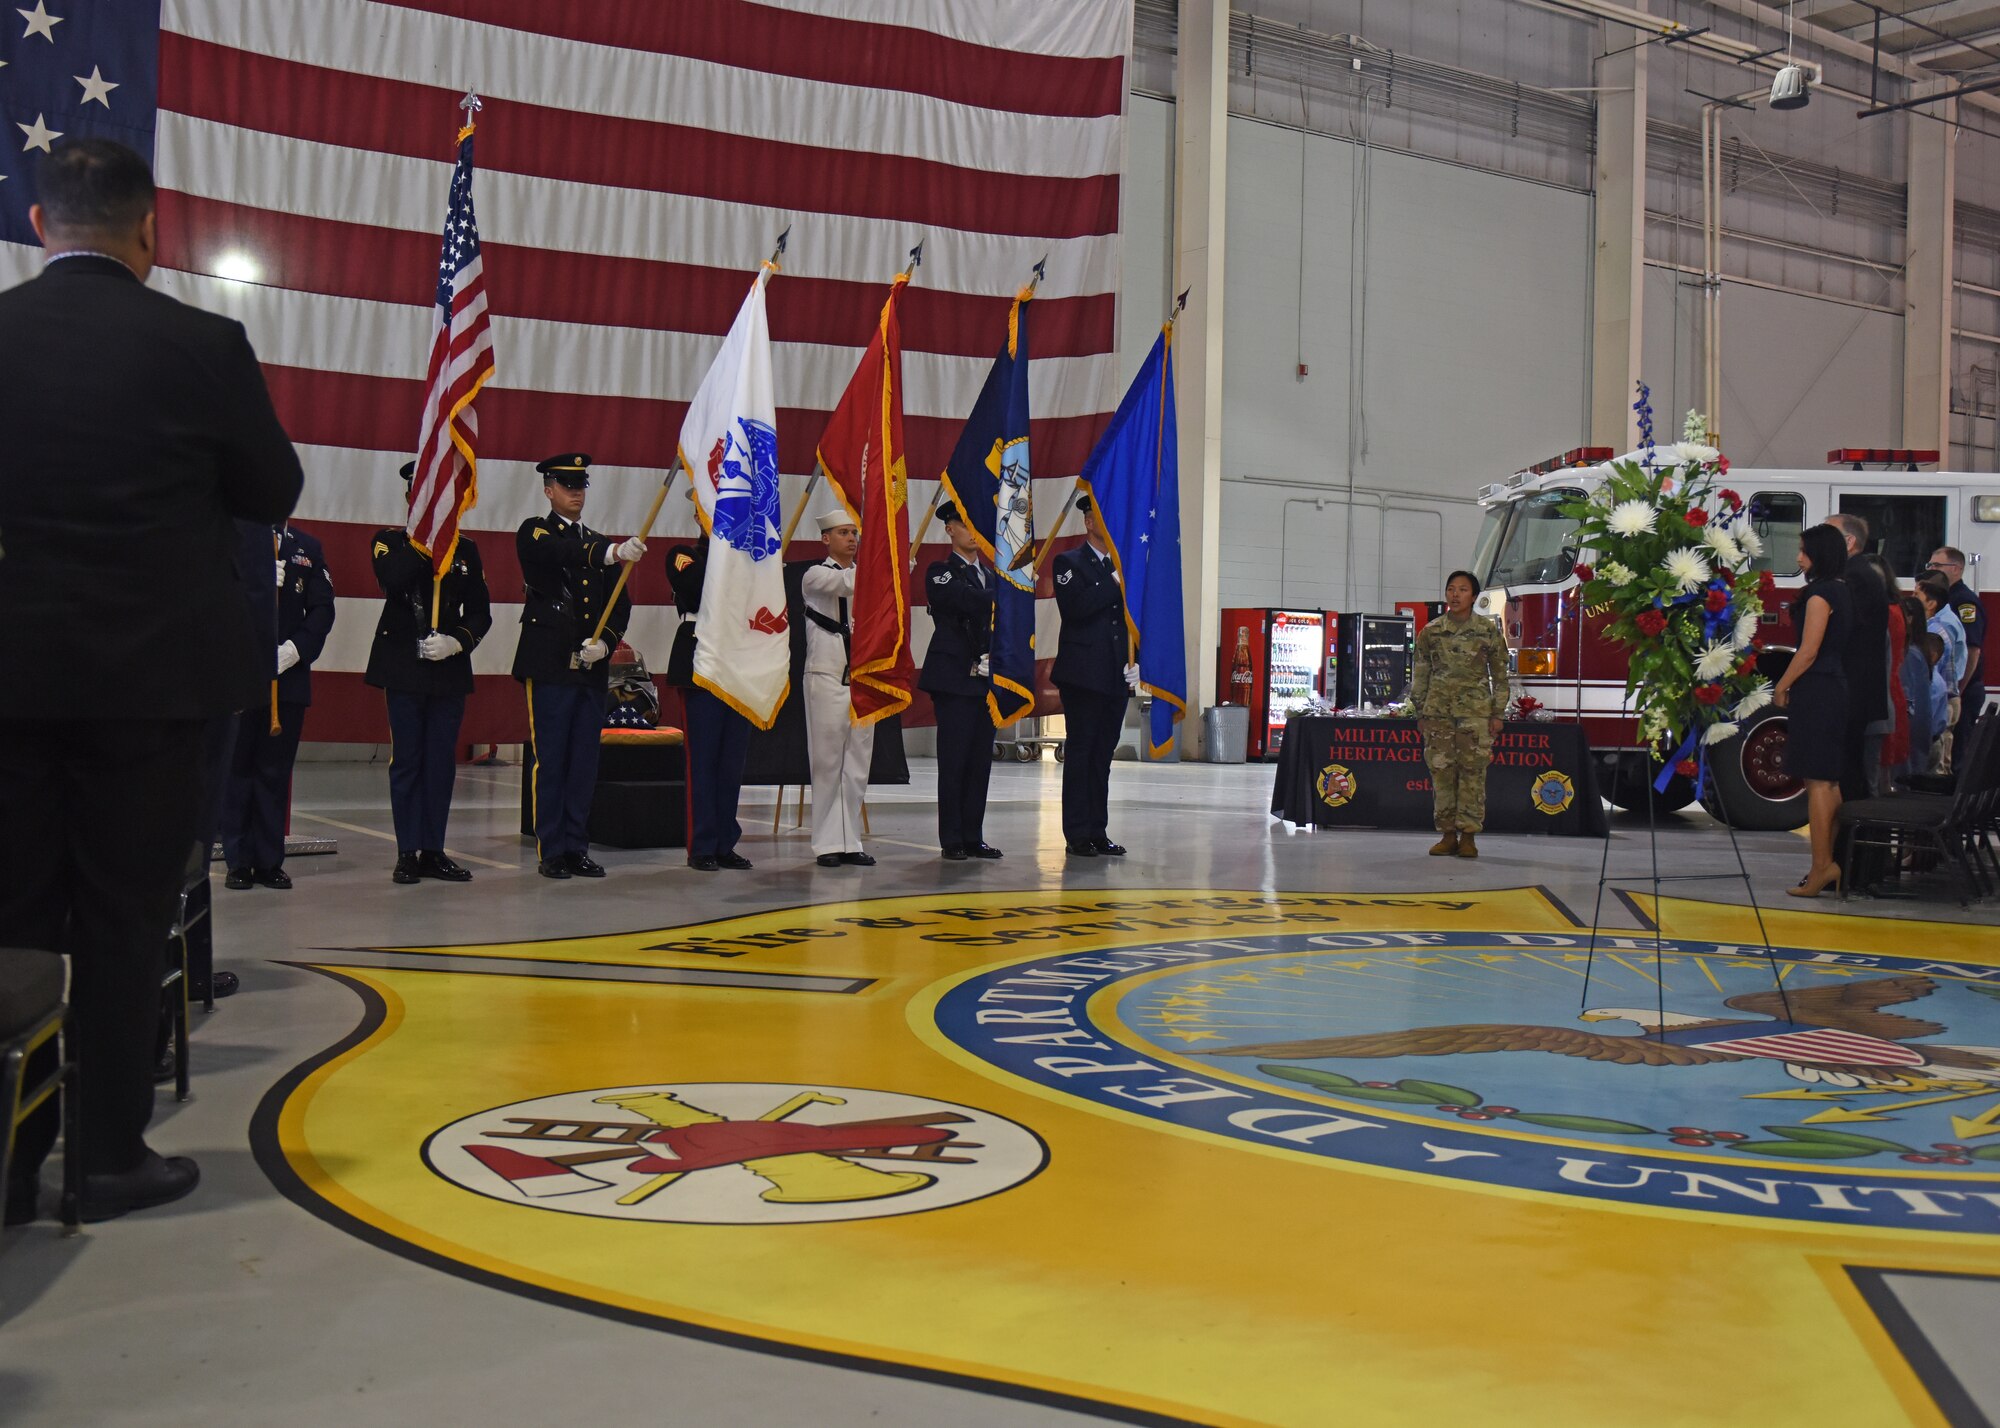 The Joint Service Color Guard post the colors, which began the Firefighter Memorial Ceremony in the Louis F. Garland Department of Defense Fire Academy High Bay at Goodfellow Air Force Base, Texas, May 3, 2019. This memorial was a way for Goodfellow to show its appreciation and honor those who have given the ultimate sacrifice. (U.S. Air Force photo by Airman 1st Class Zachary Chapman/Released)